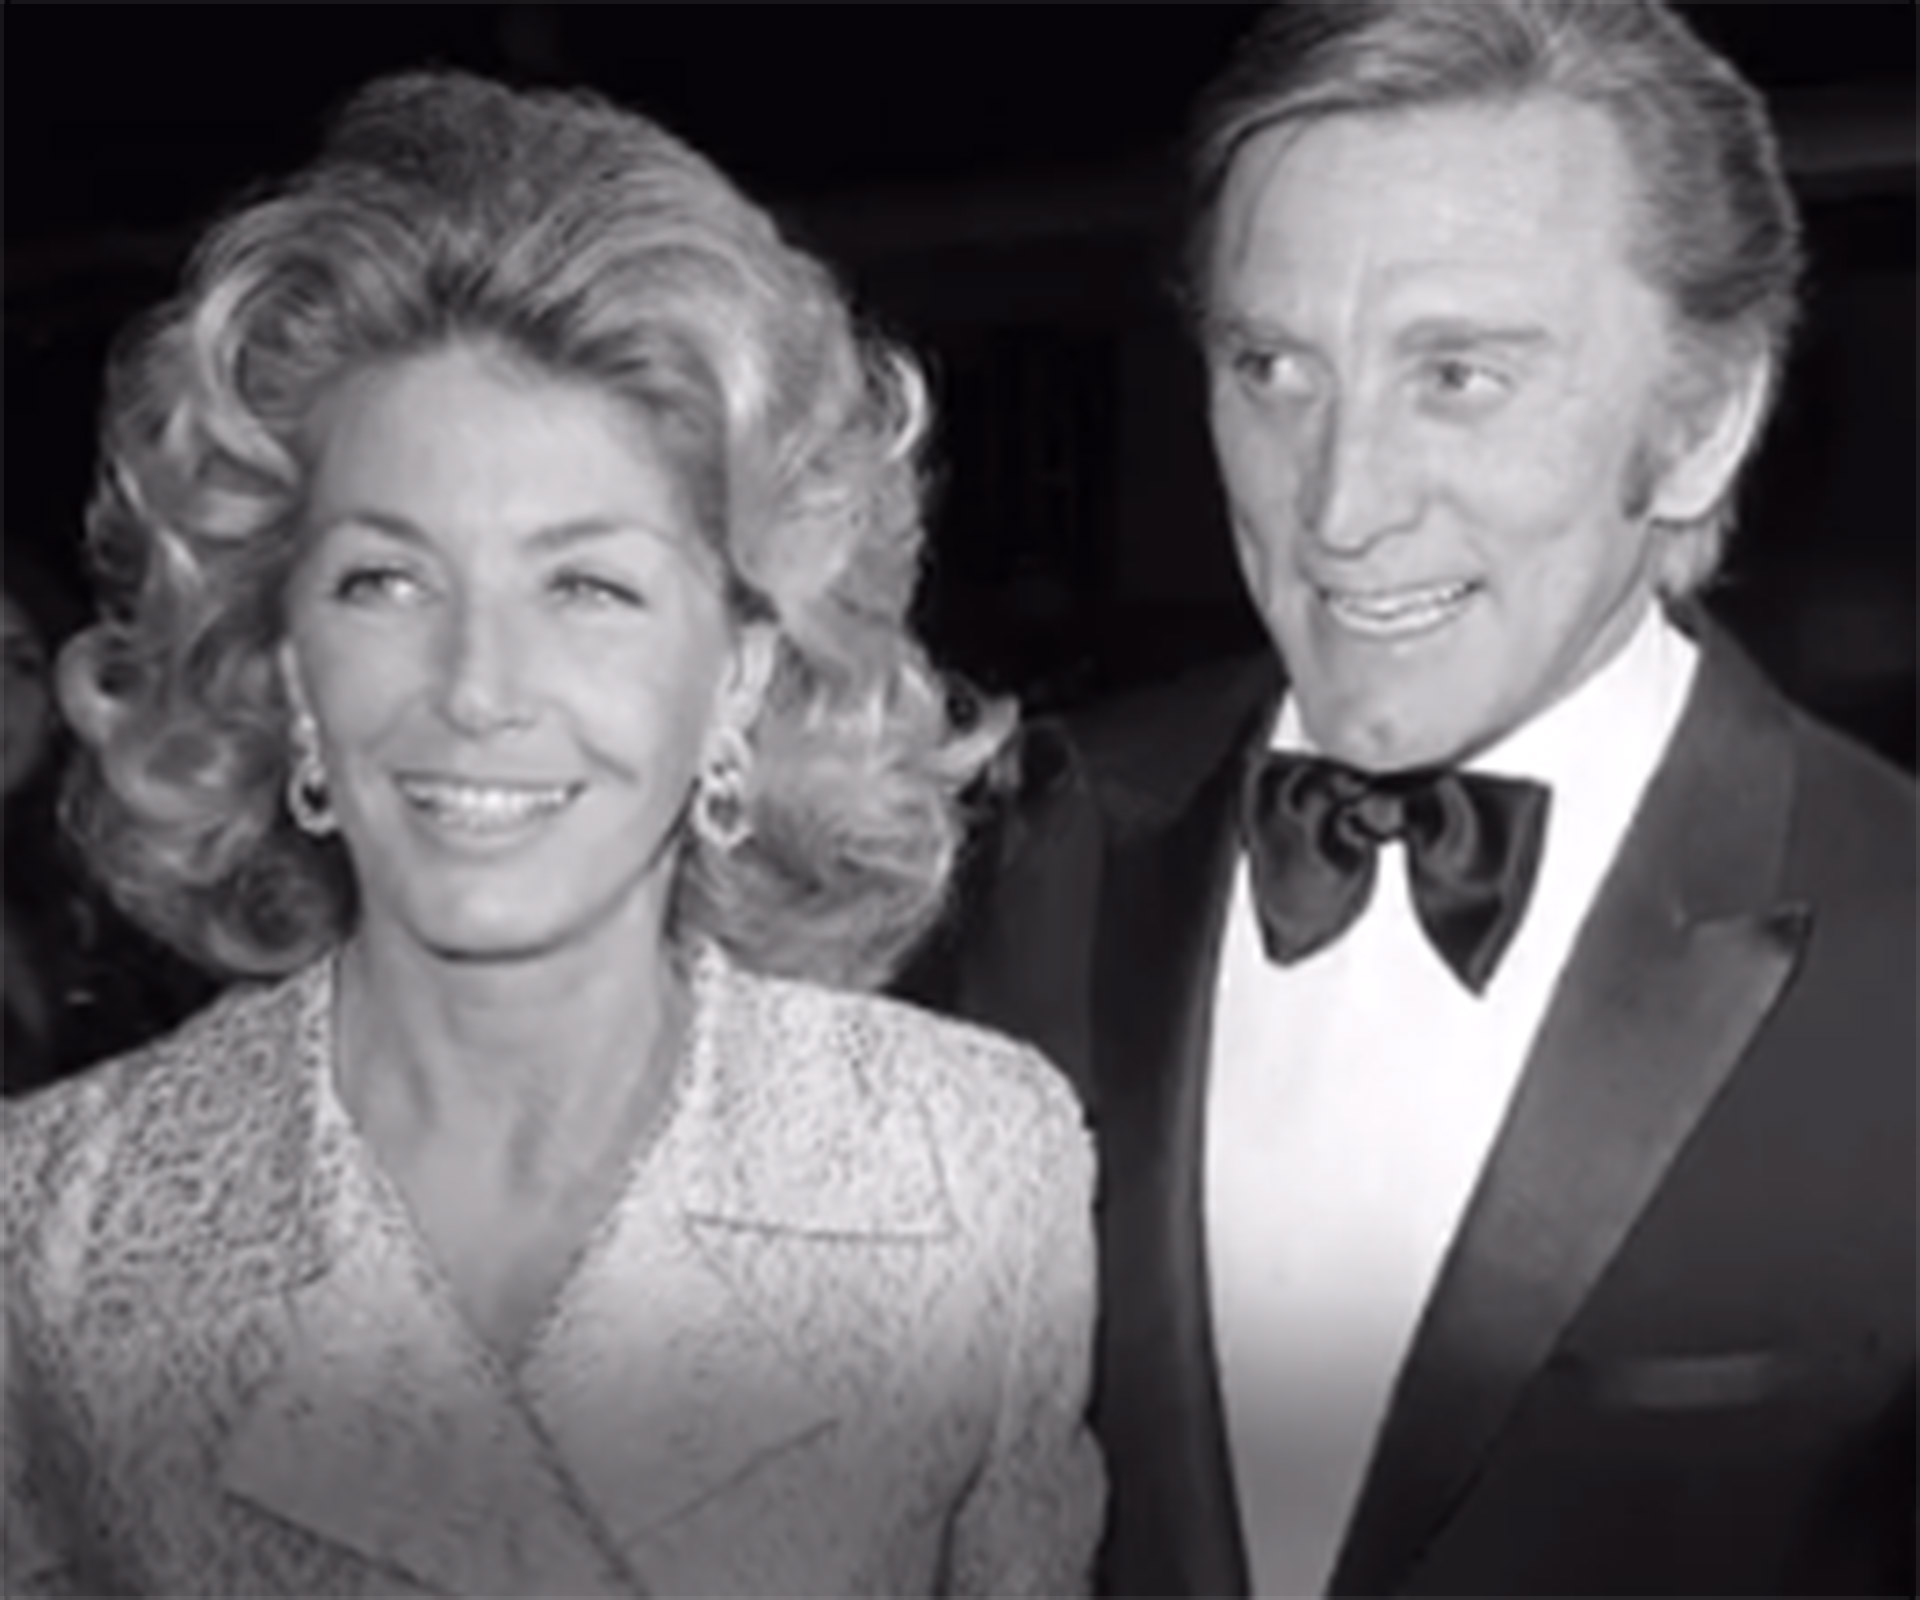 Hollywood icon Kirk Douglas co-wrote a book that details all of his past infidelities…with his wife